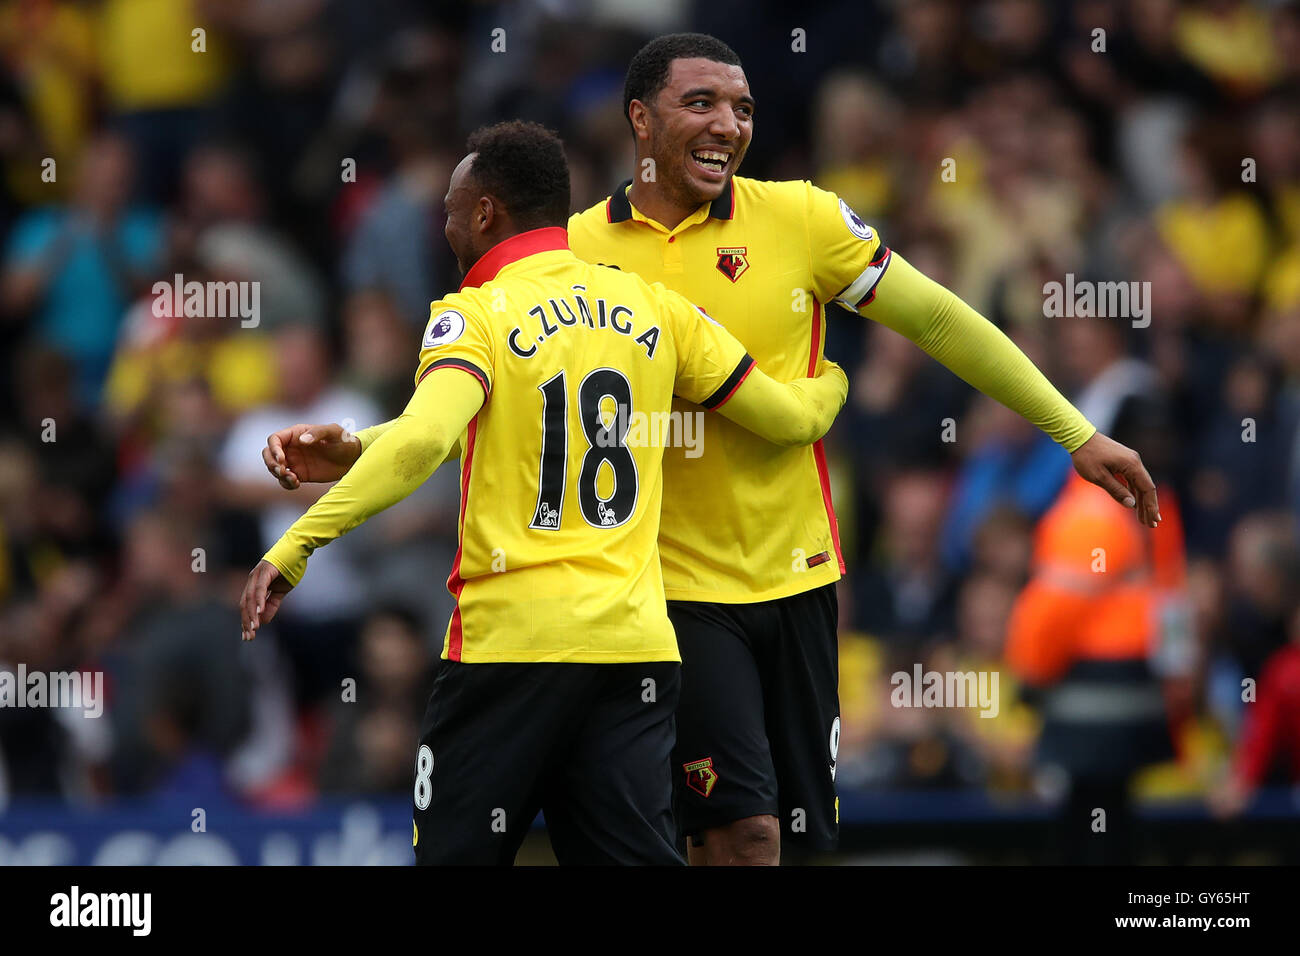 Watford's Troy Deeney (right) and Watford's Juan Camilo Zuniga celebrate victory after the final whistle during the Premier League match at Vicarage Road, Watford. Stock Photo